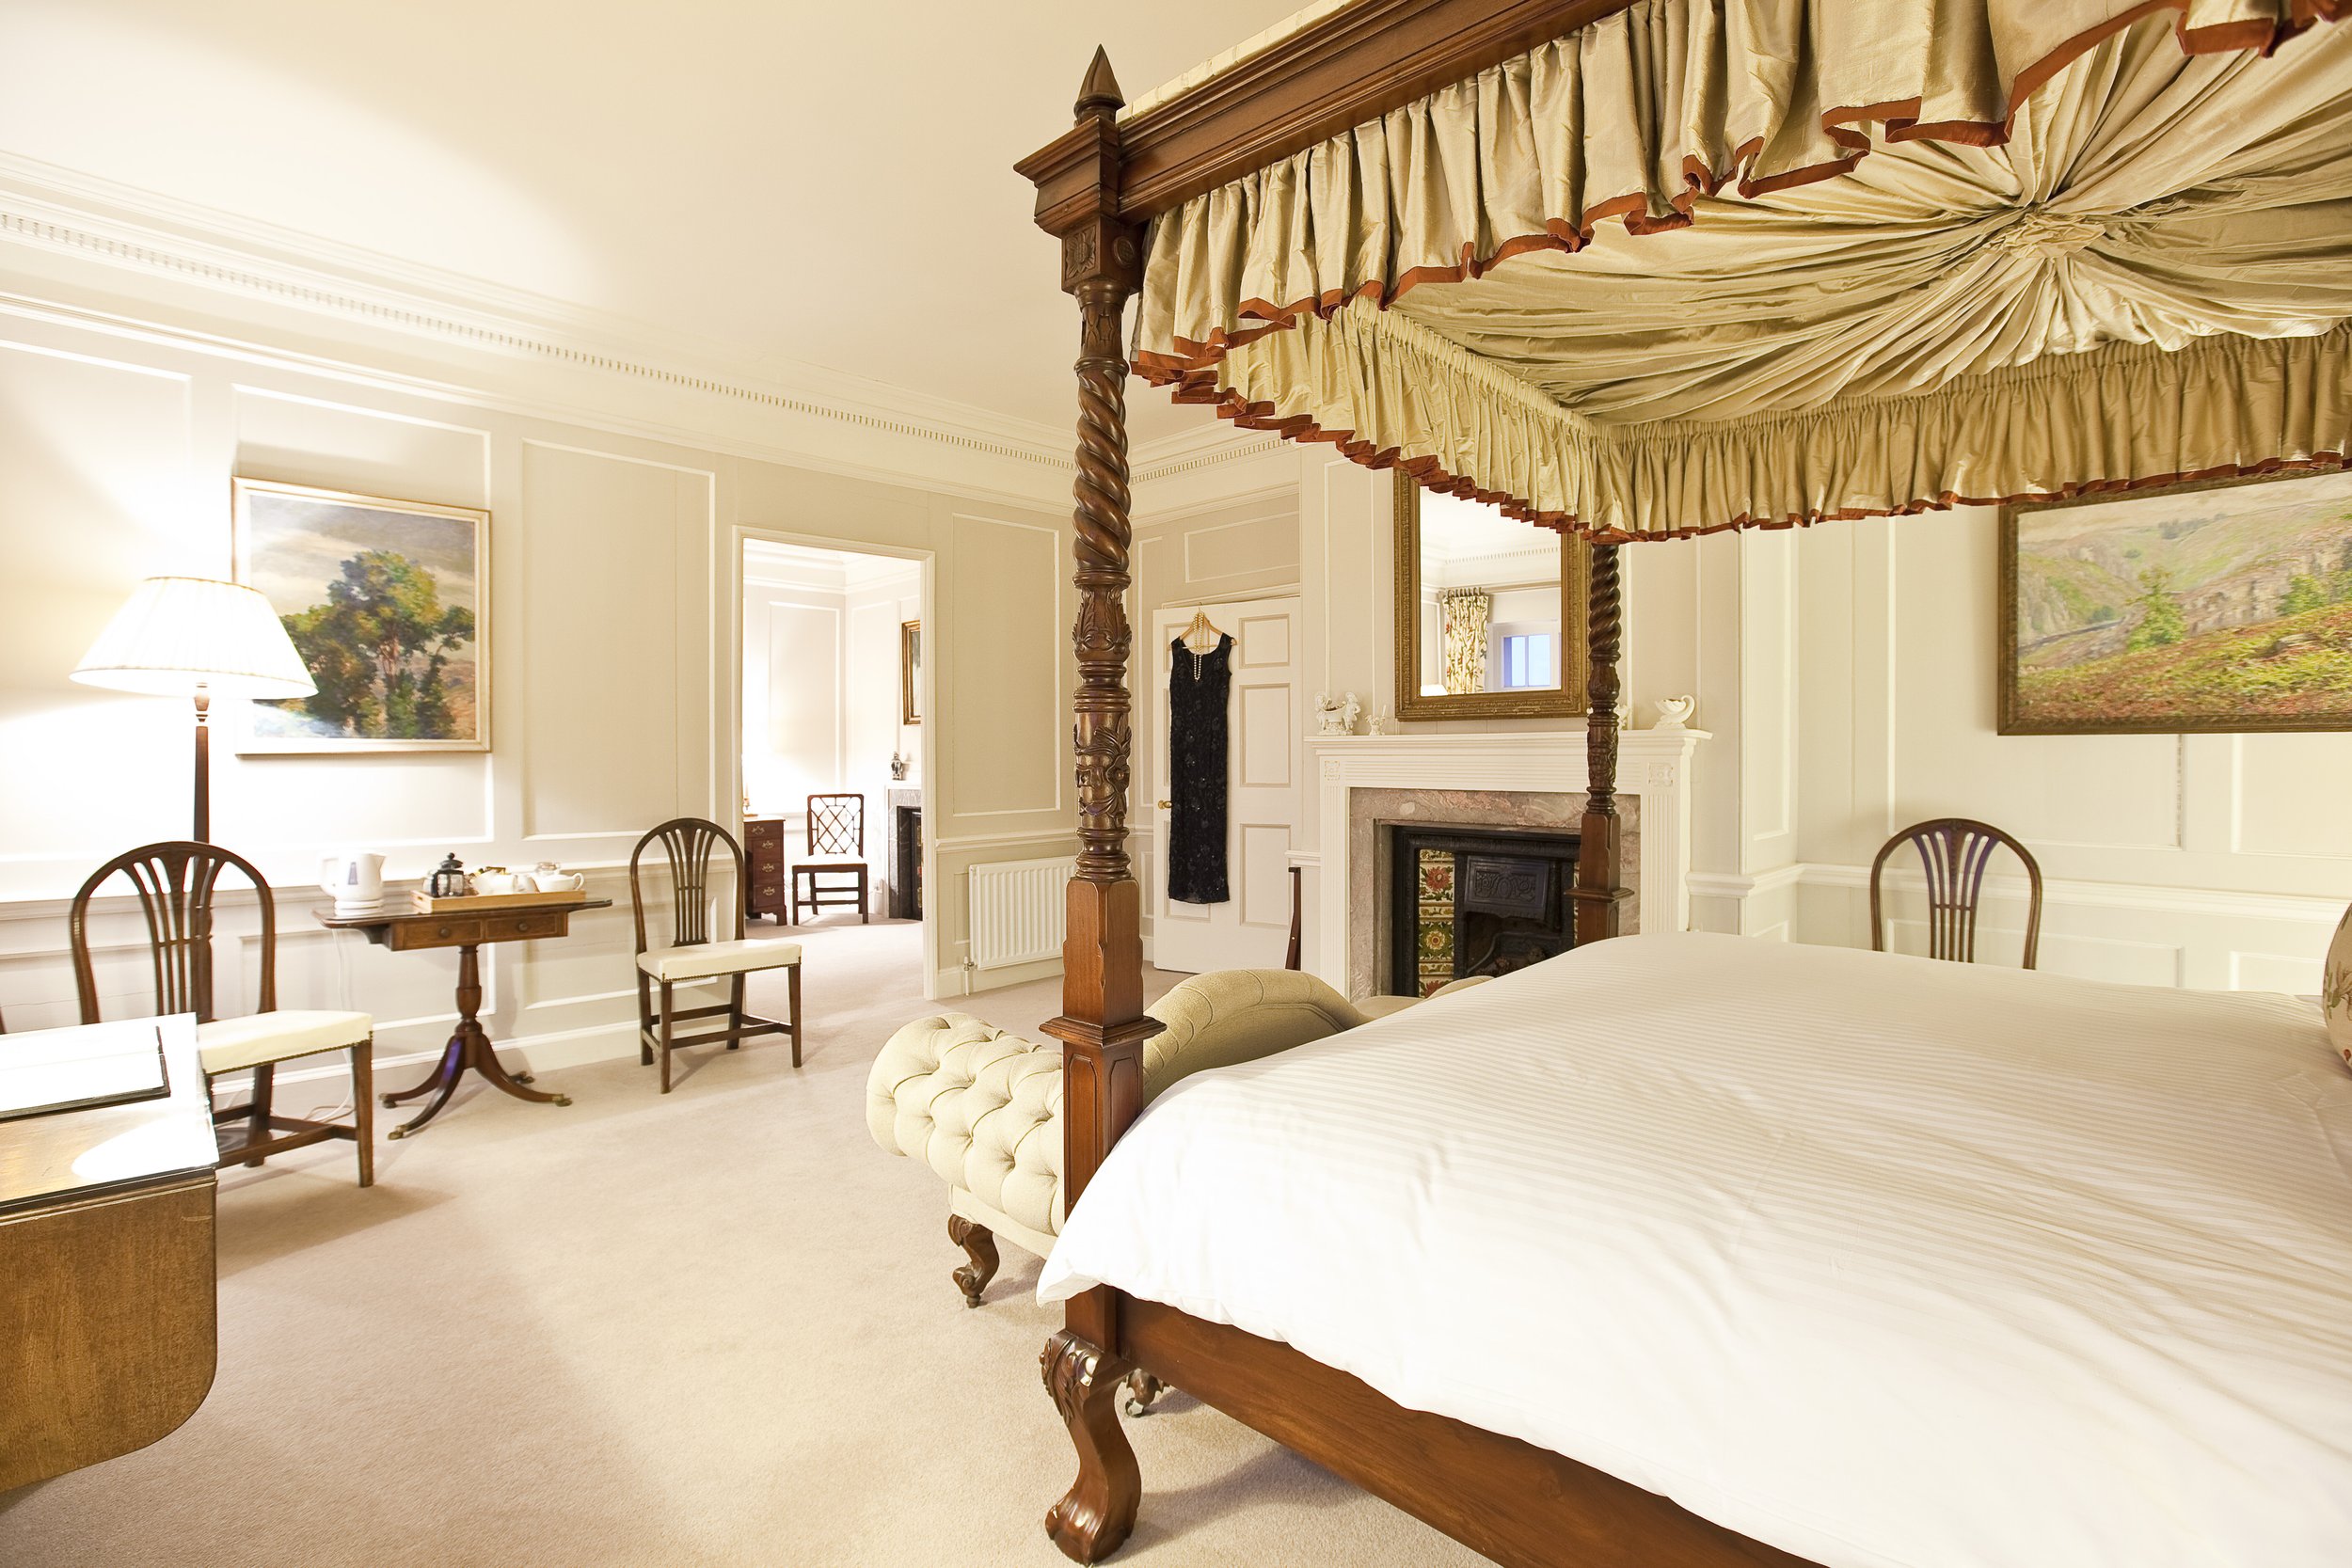 05_Dewhurst Bedroom with Four Poster Bed.jpg